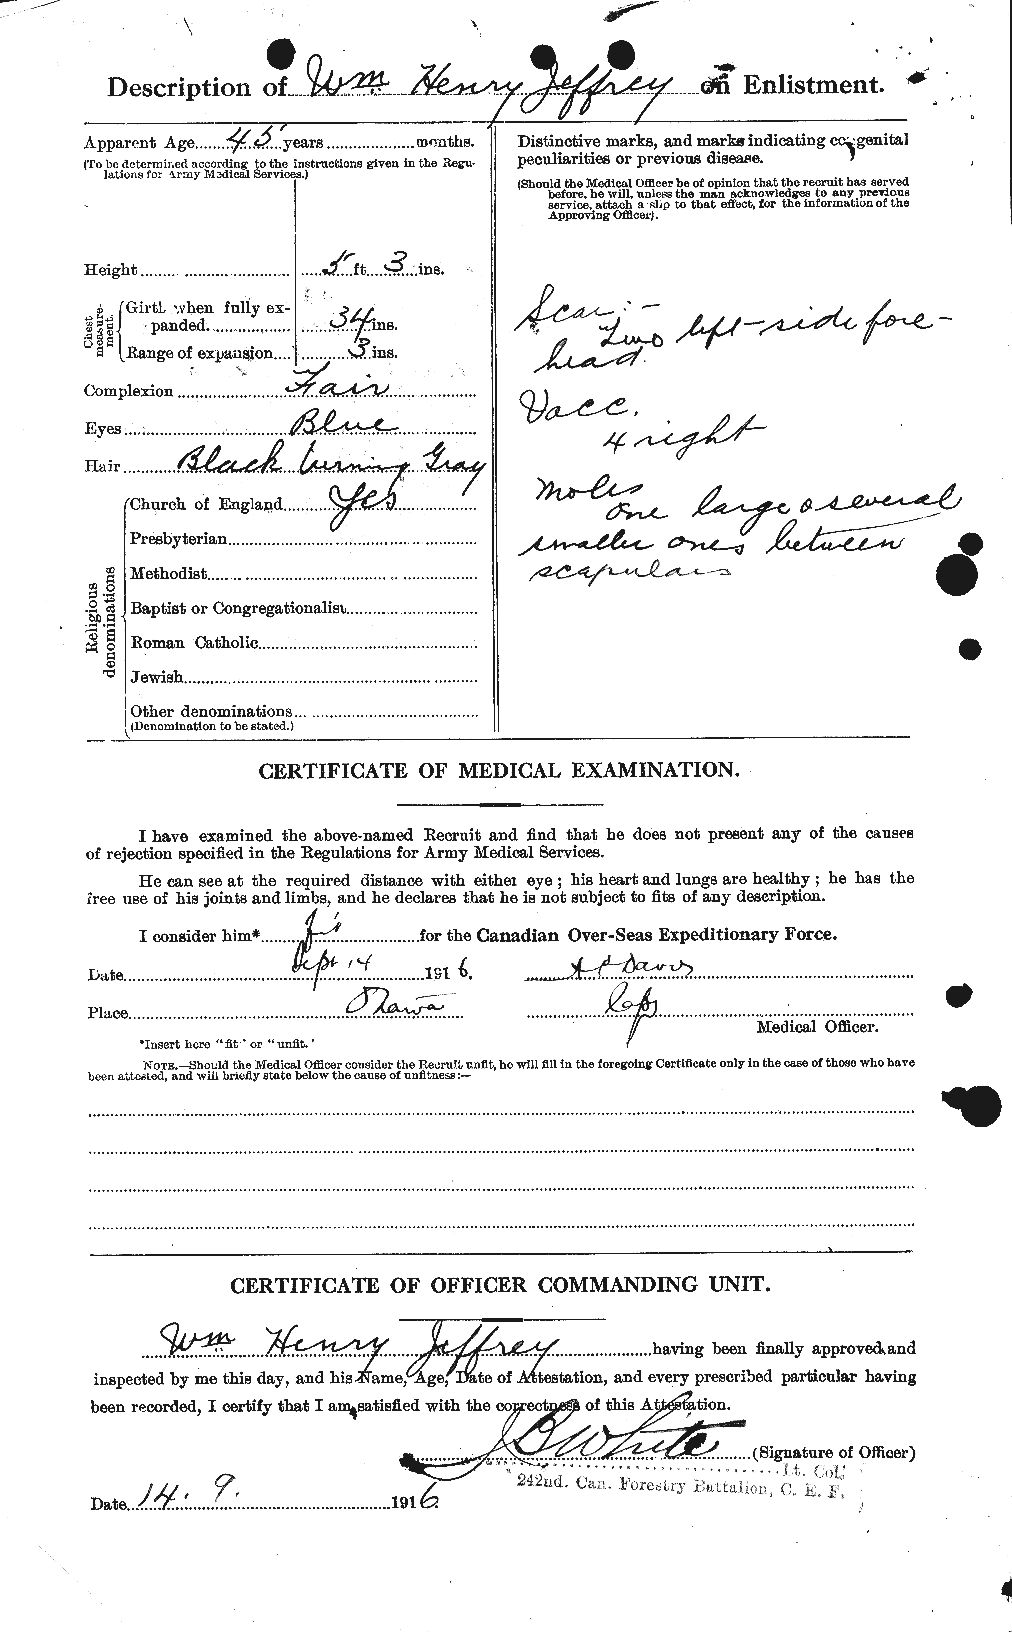 Personnel Records of the First World War - CEF 417813b